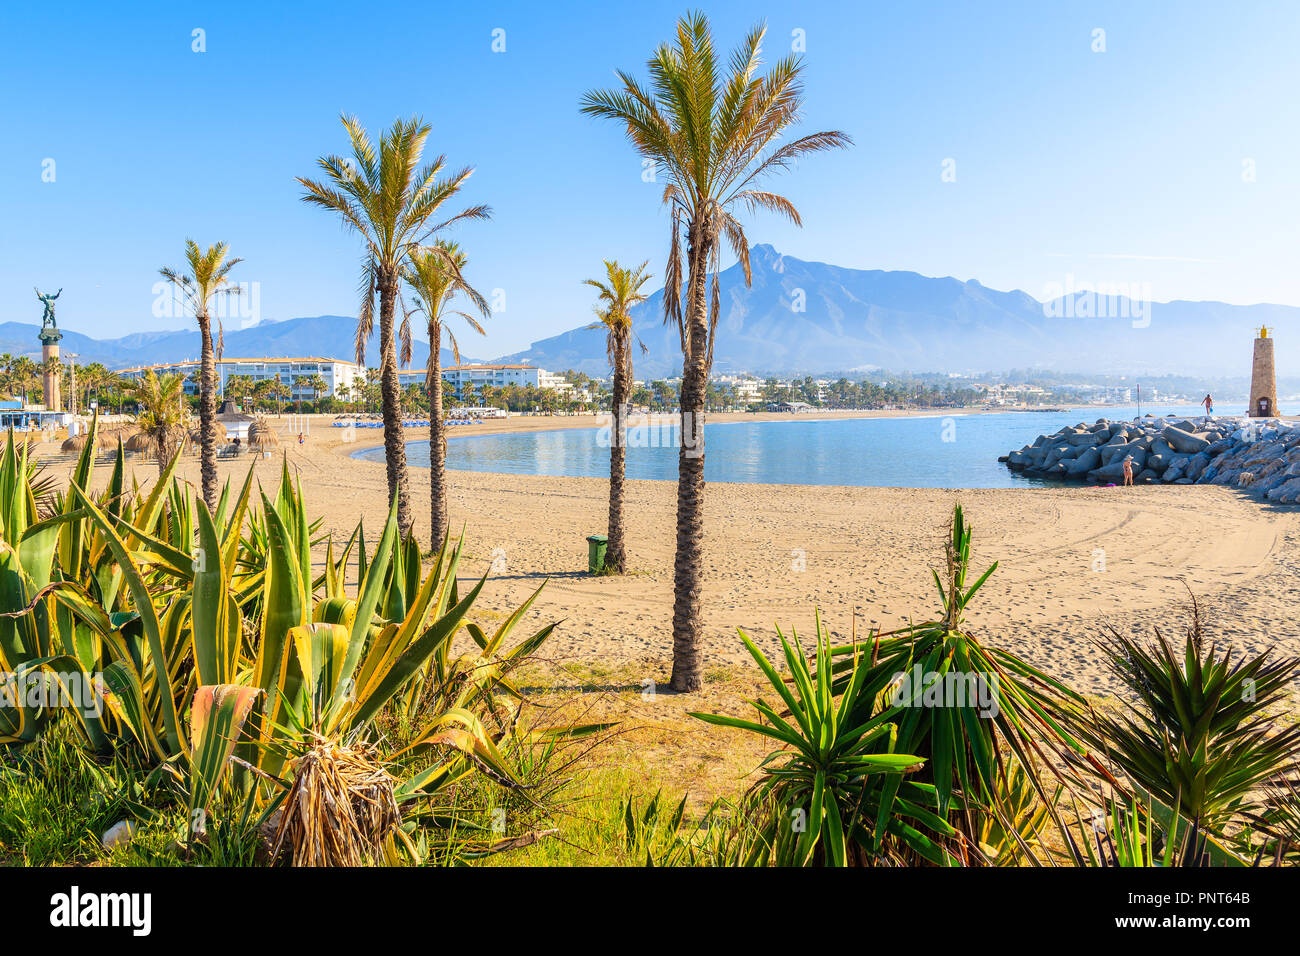 View of beautiful beach with palm trees in Marbella near Puerto Banus marina, Andalusia, Spain Stock Photo